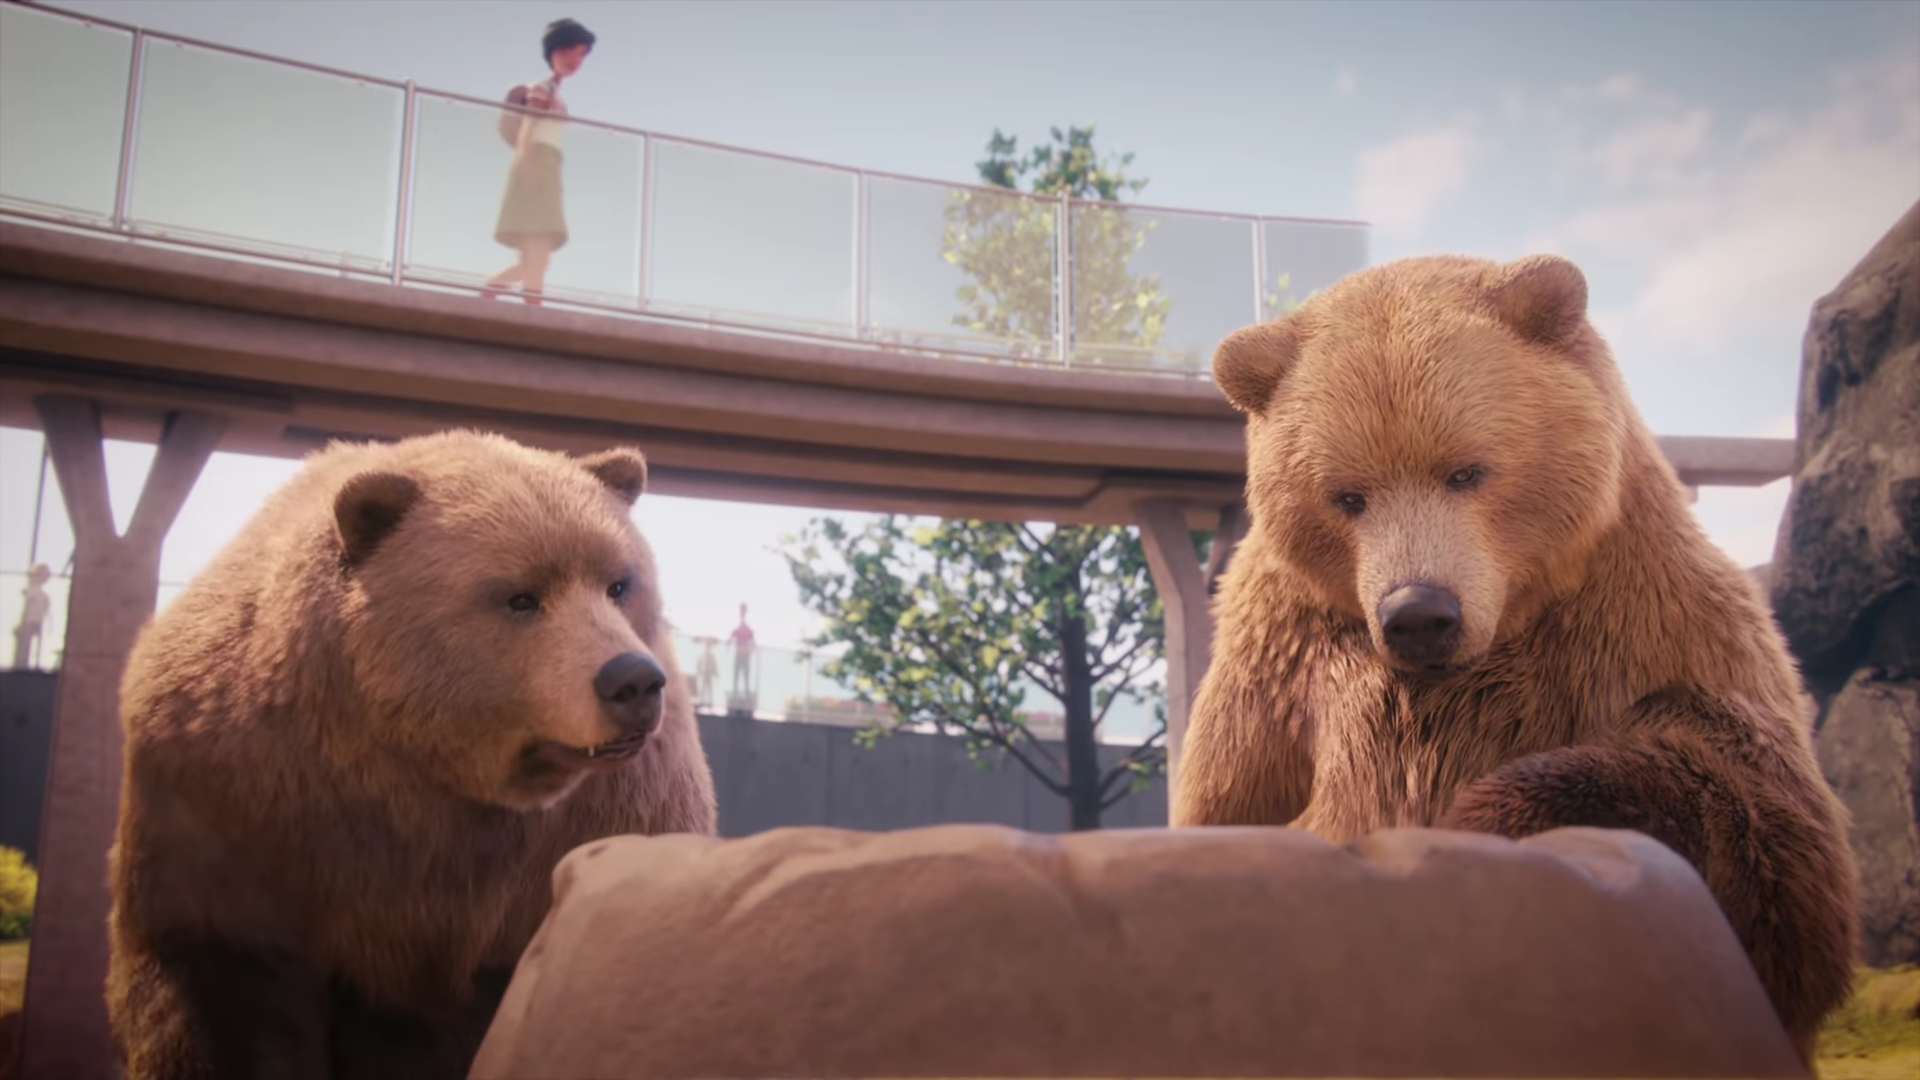 Planet Zoo' is the modern 'Zoo Tycoon' we've been waiting for